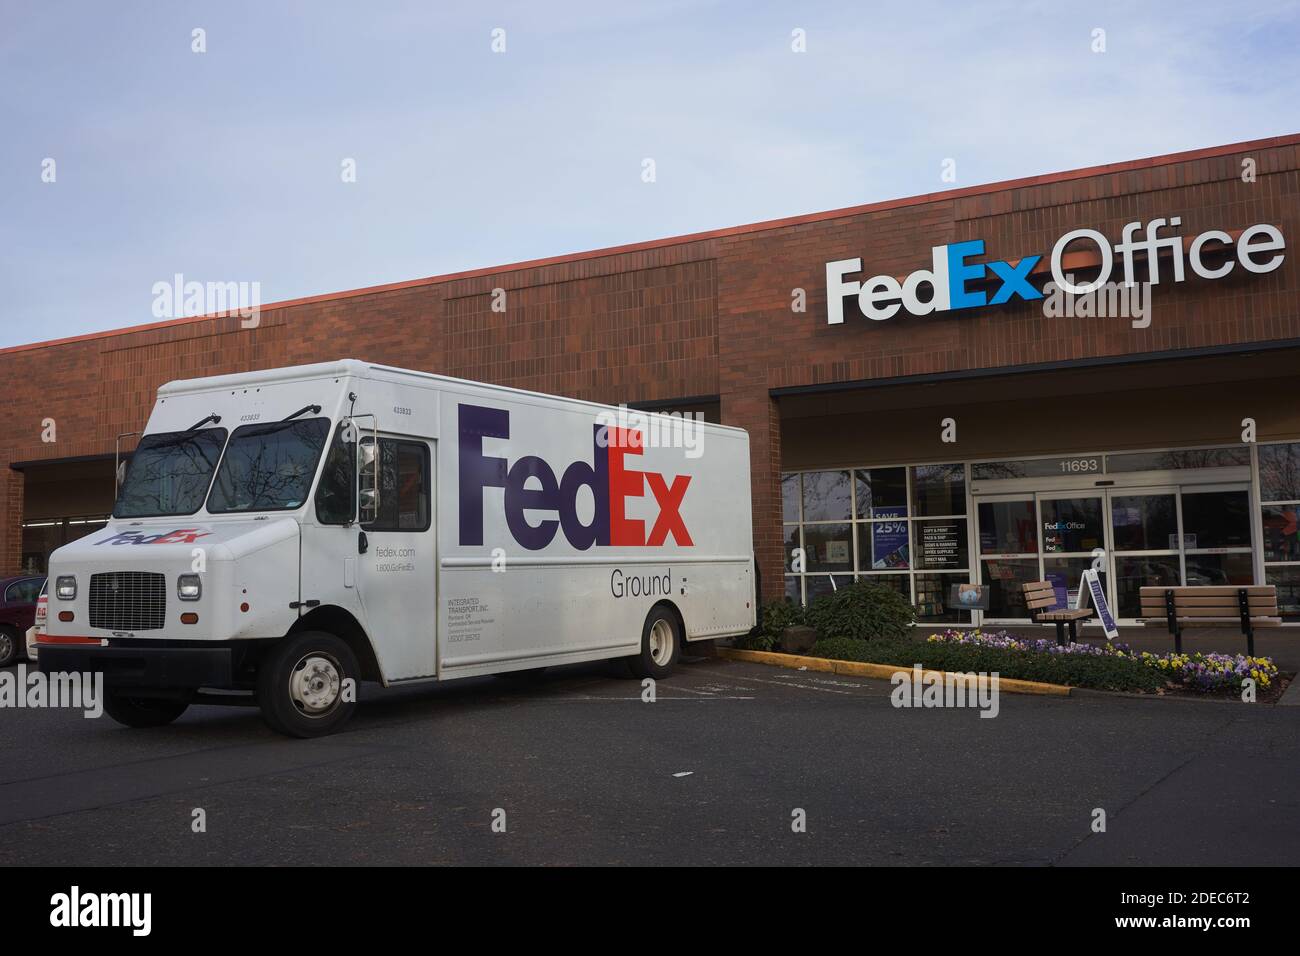 A FedEx Ground delivery truck is seen outside a FedEx office in Beaverton, Oregon. Stock Photo